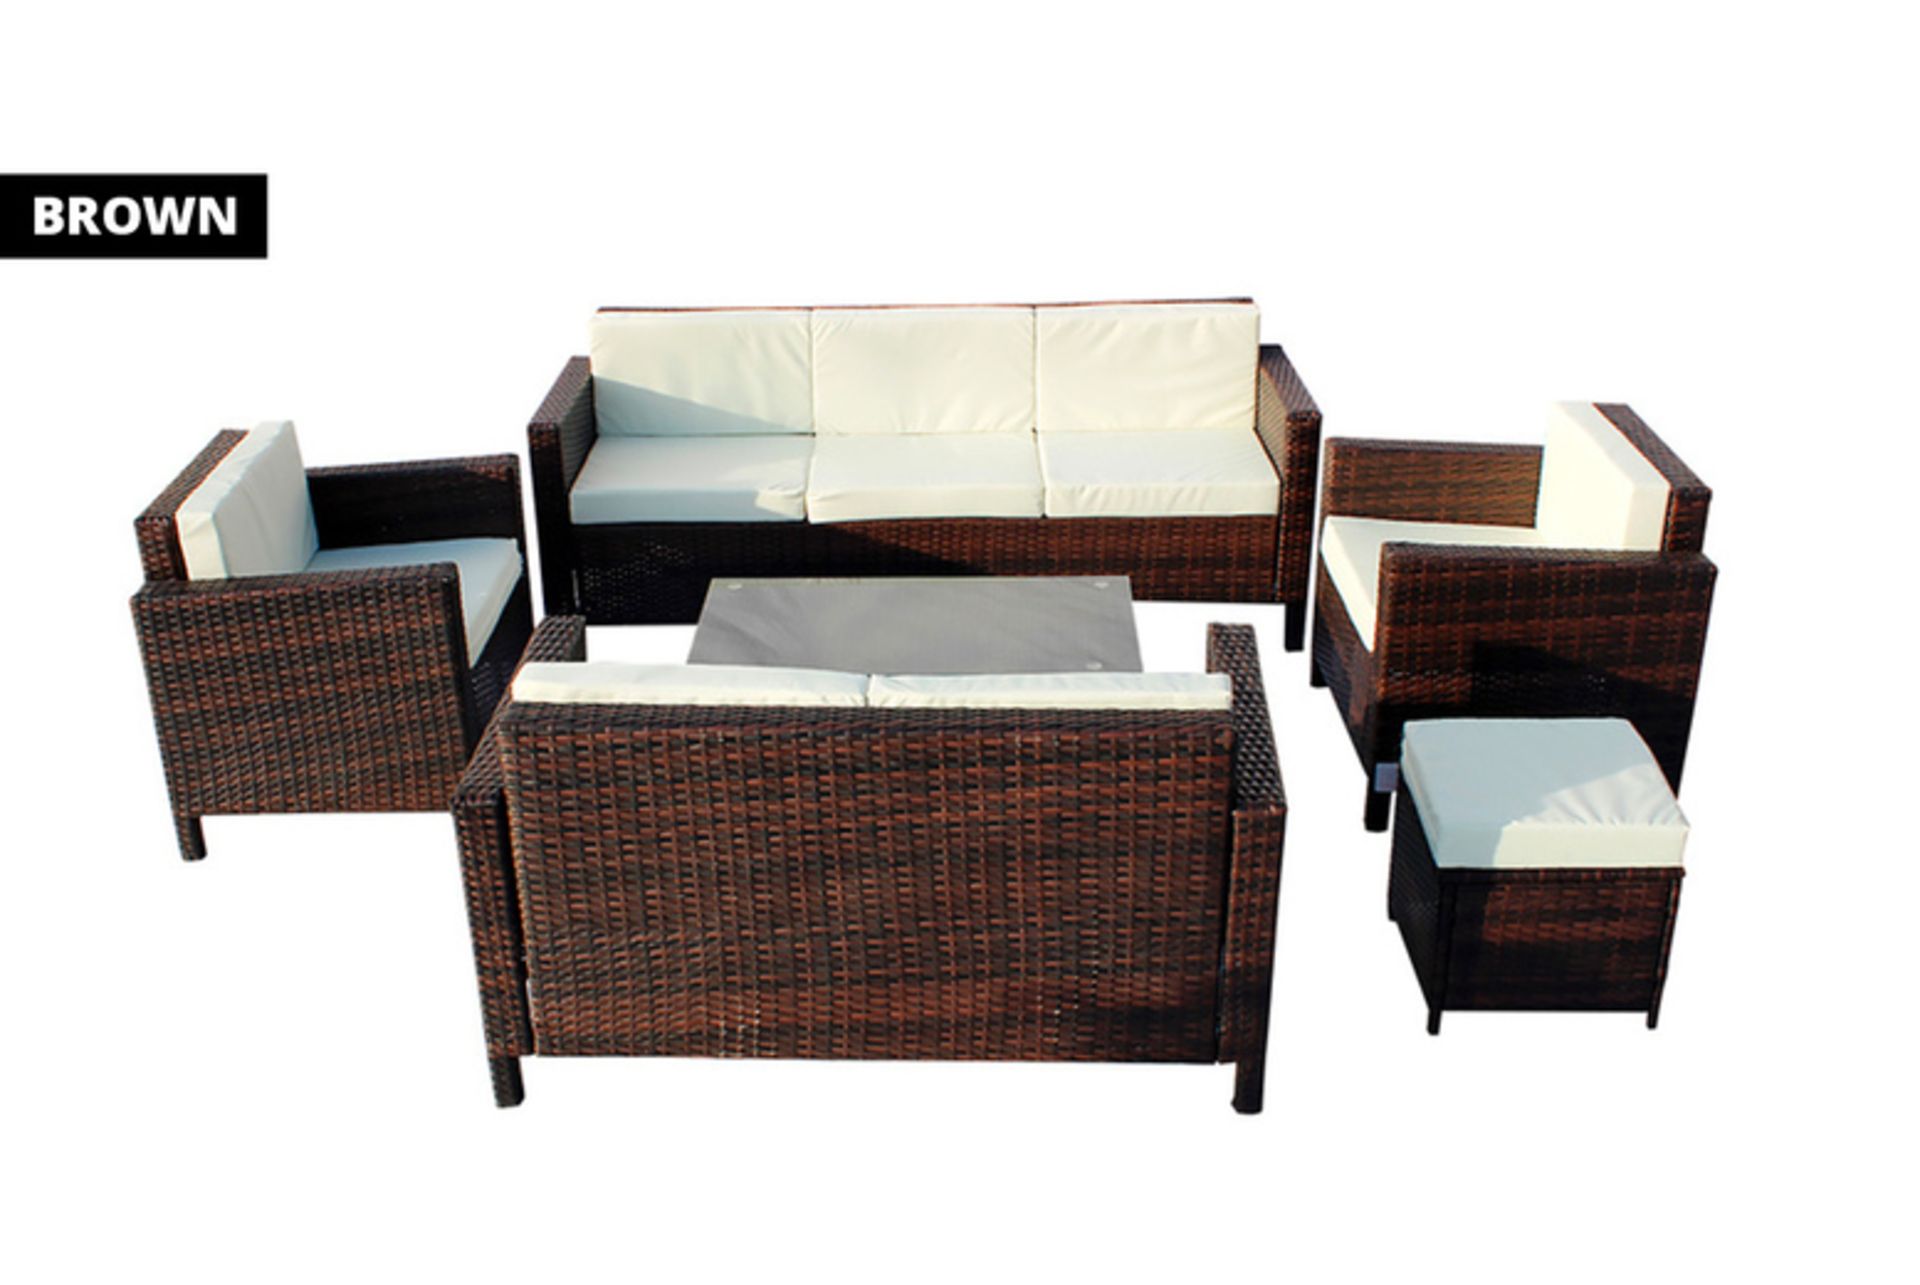 Free Delivery - Job lot of 5x 8-Seater Greenwich Rattan Chair & Sofa Garden Furniture Set - Brown